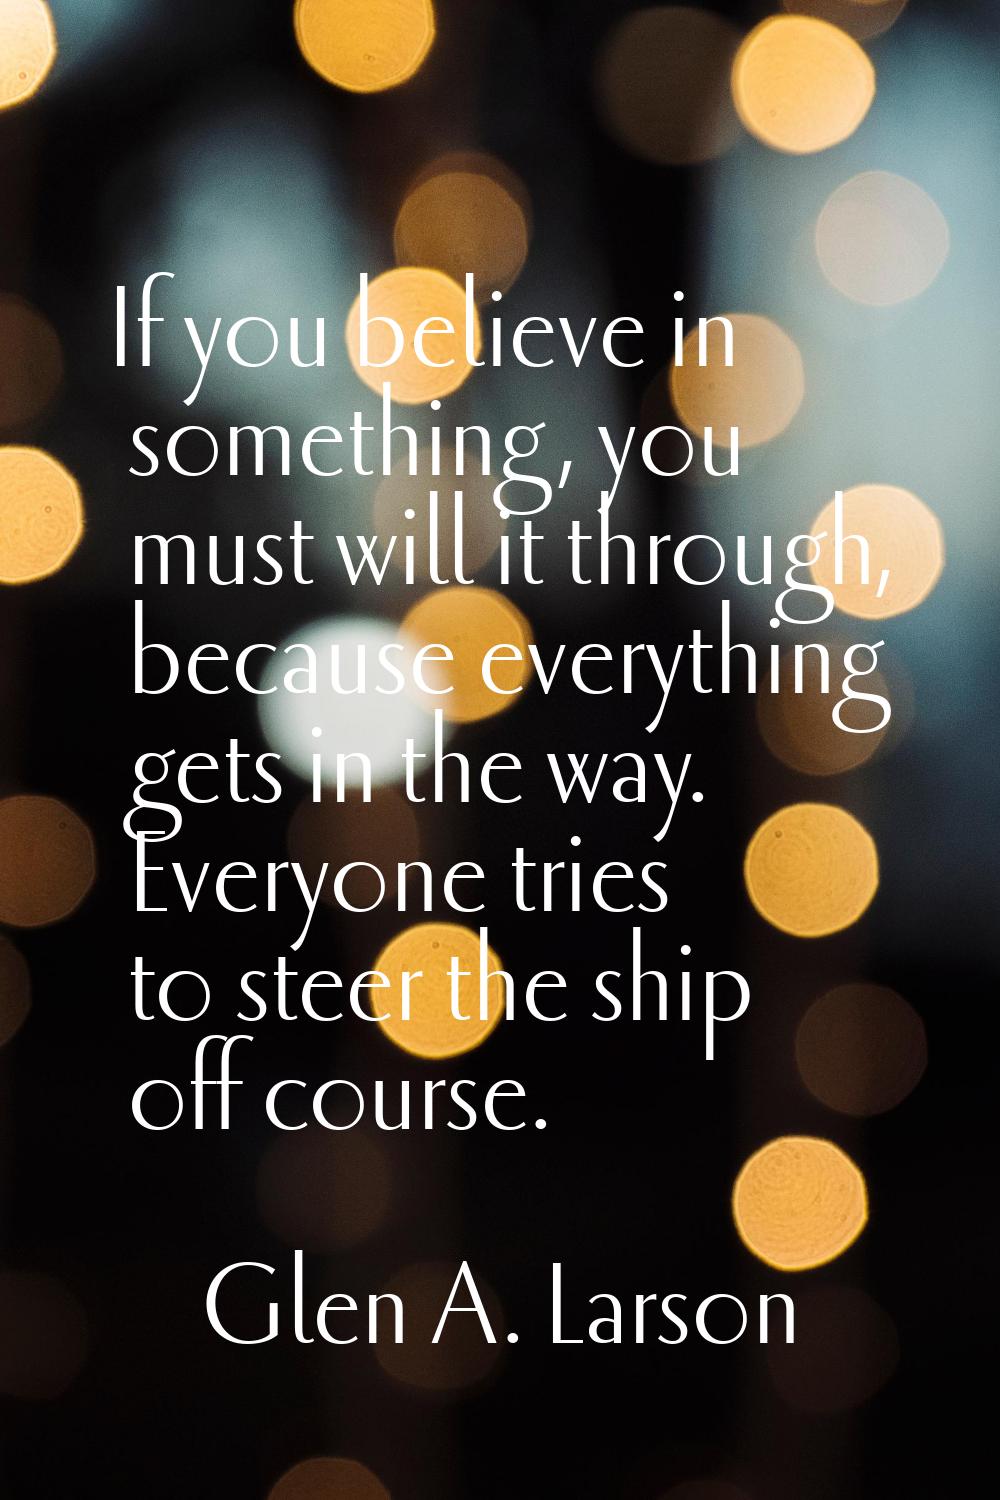 If you believe in something, you must will it through, because everything gets in the way. Everyone